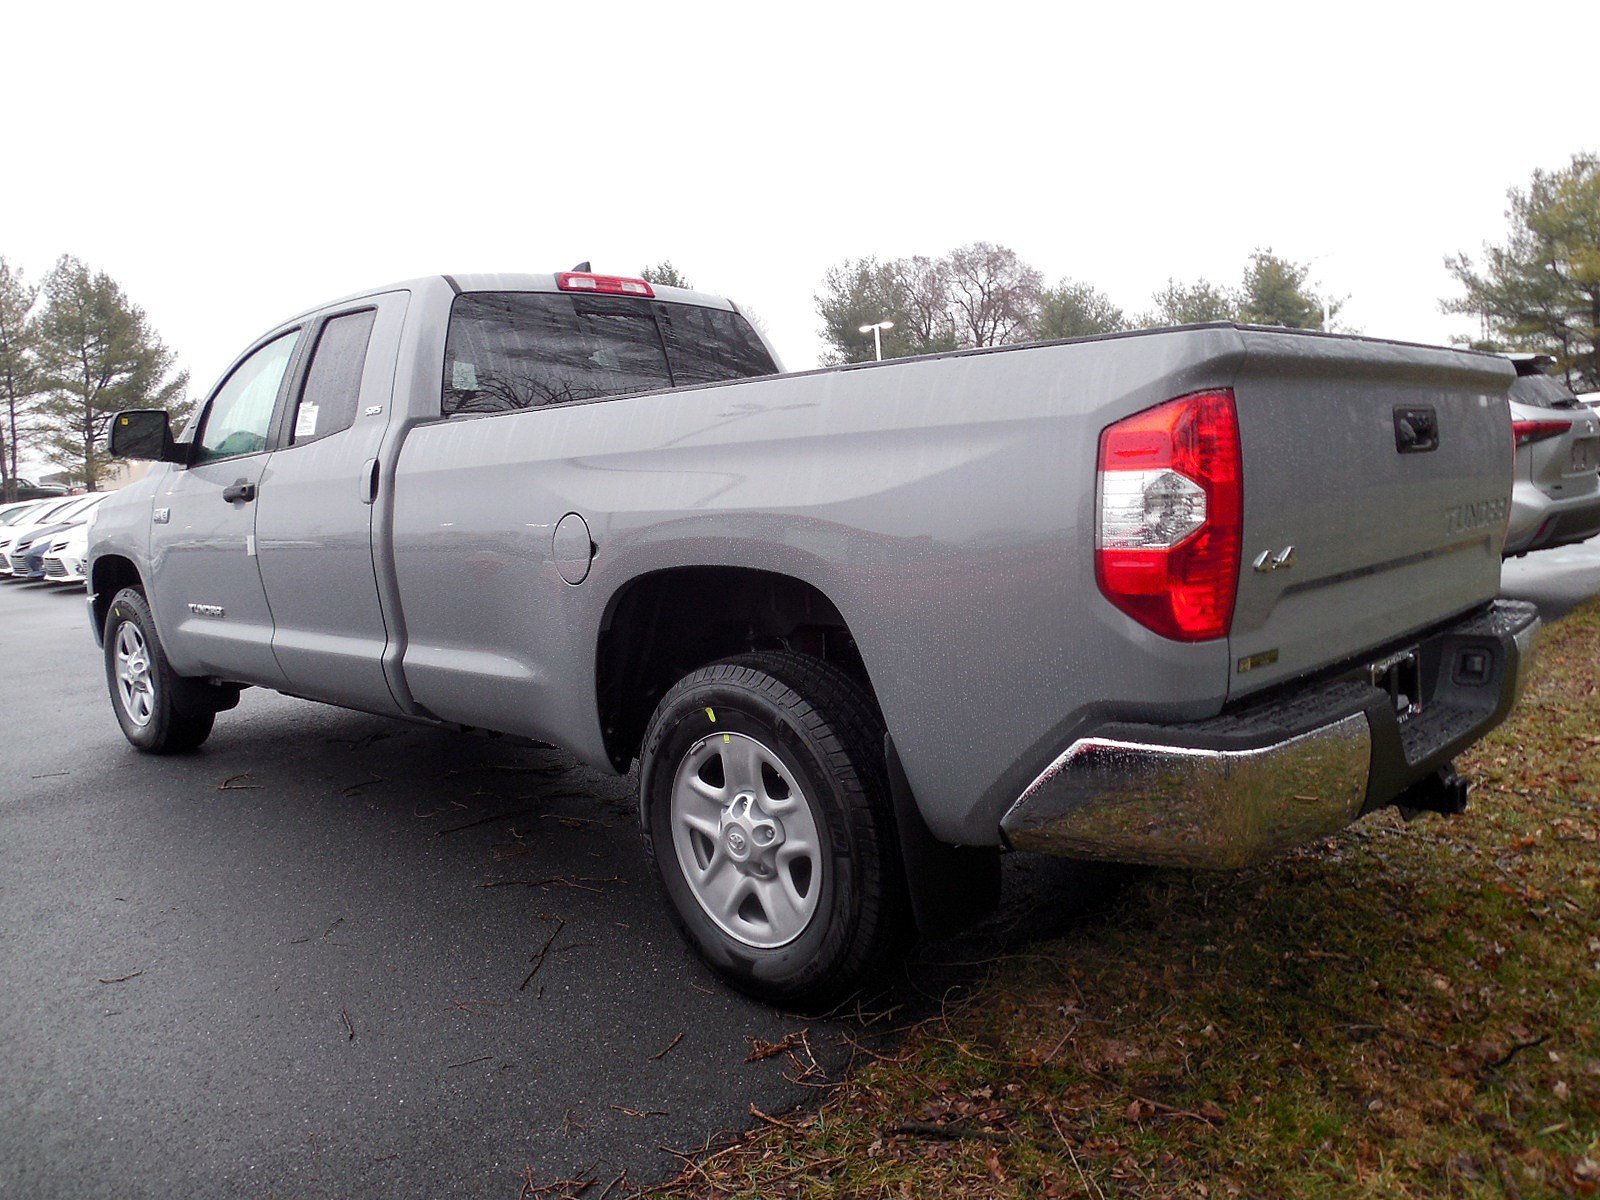 New 2020 Toyota Tundra SR5 Double Cab in East Petersburg #14622